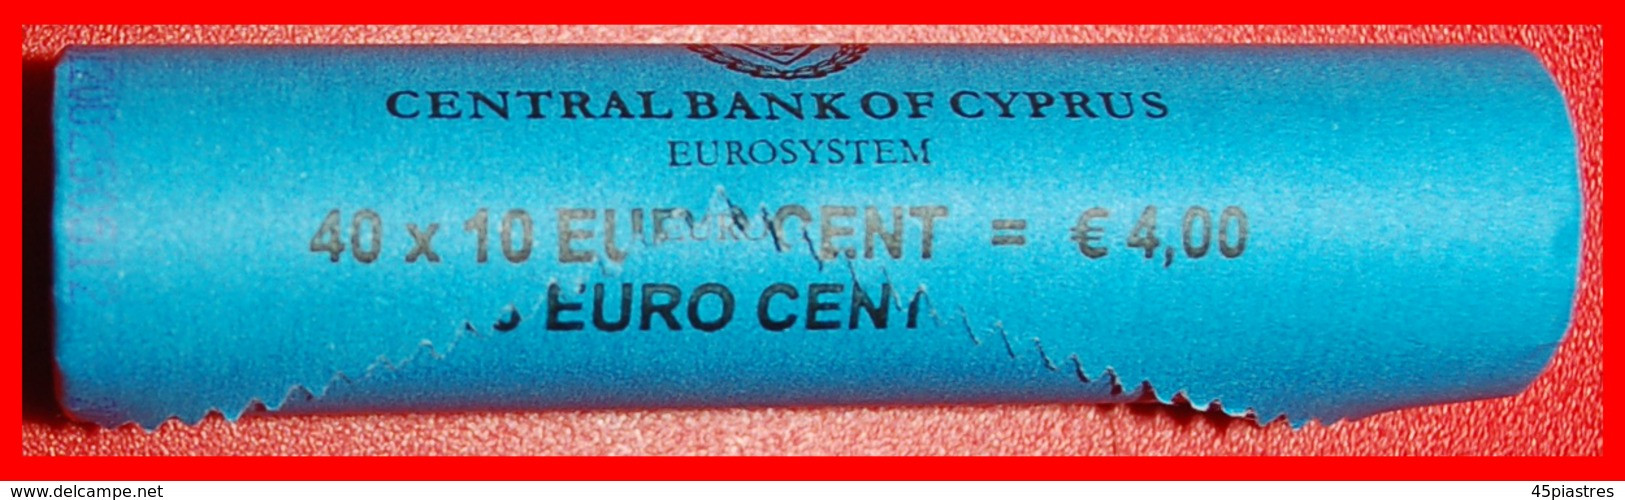 • GREECE: CYPRUS ★ 10 CENT 2012 UNC NORDIC GOLD ROLL UNCOMMON! SHIP! LOW START ★ NO RESERVE! - Rolls